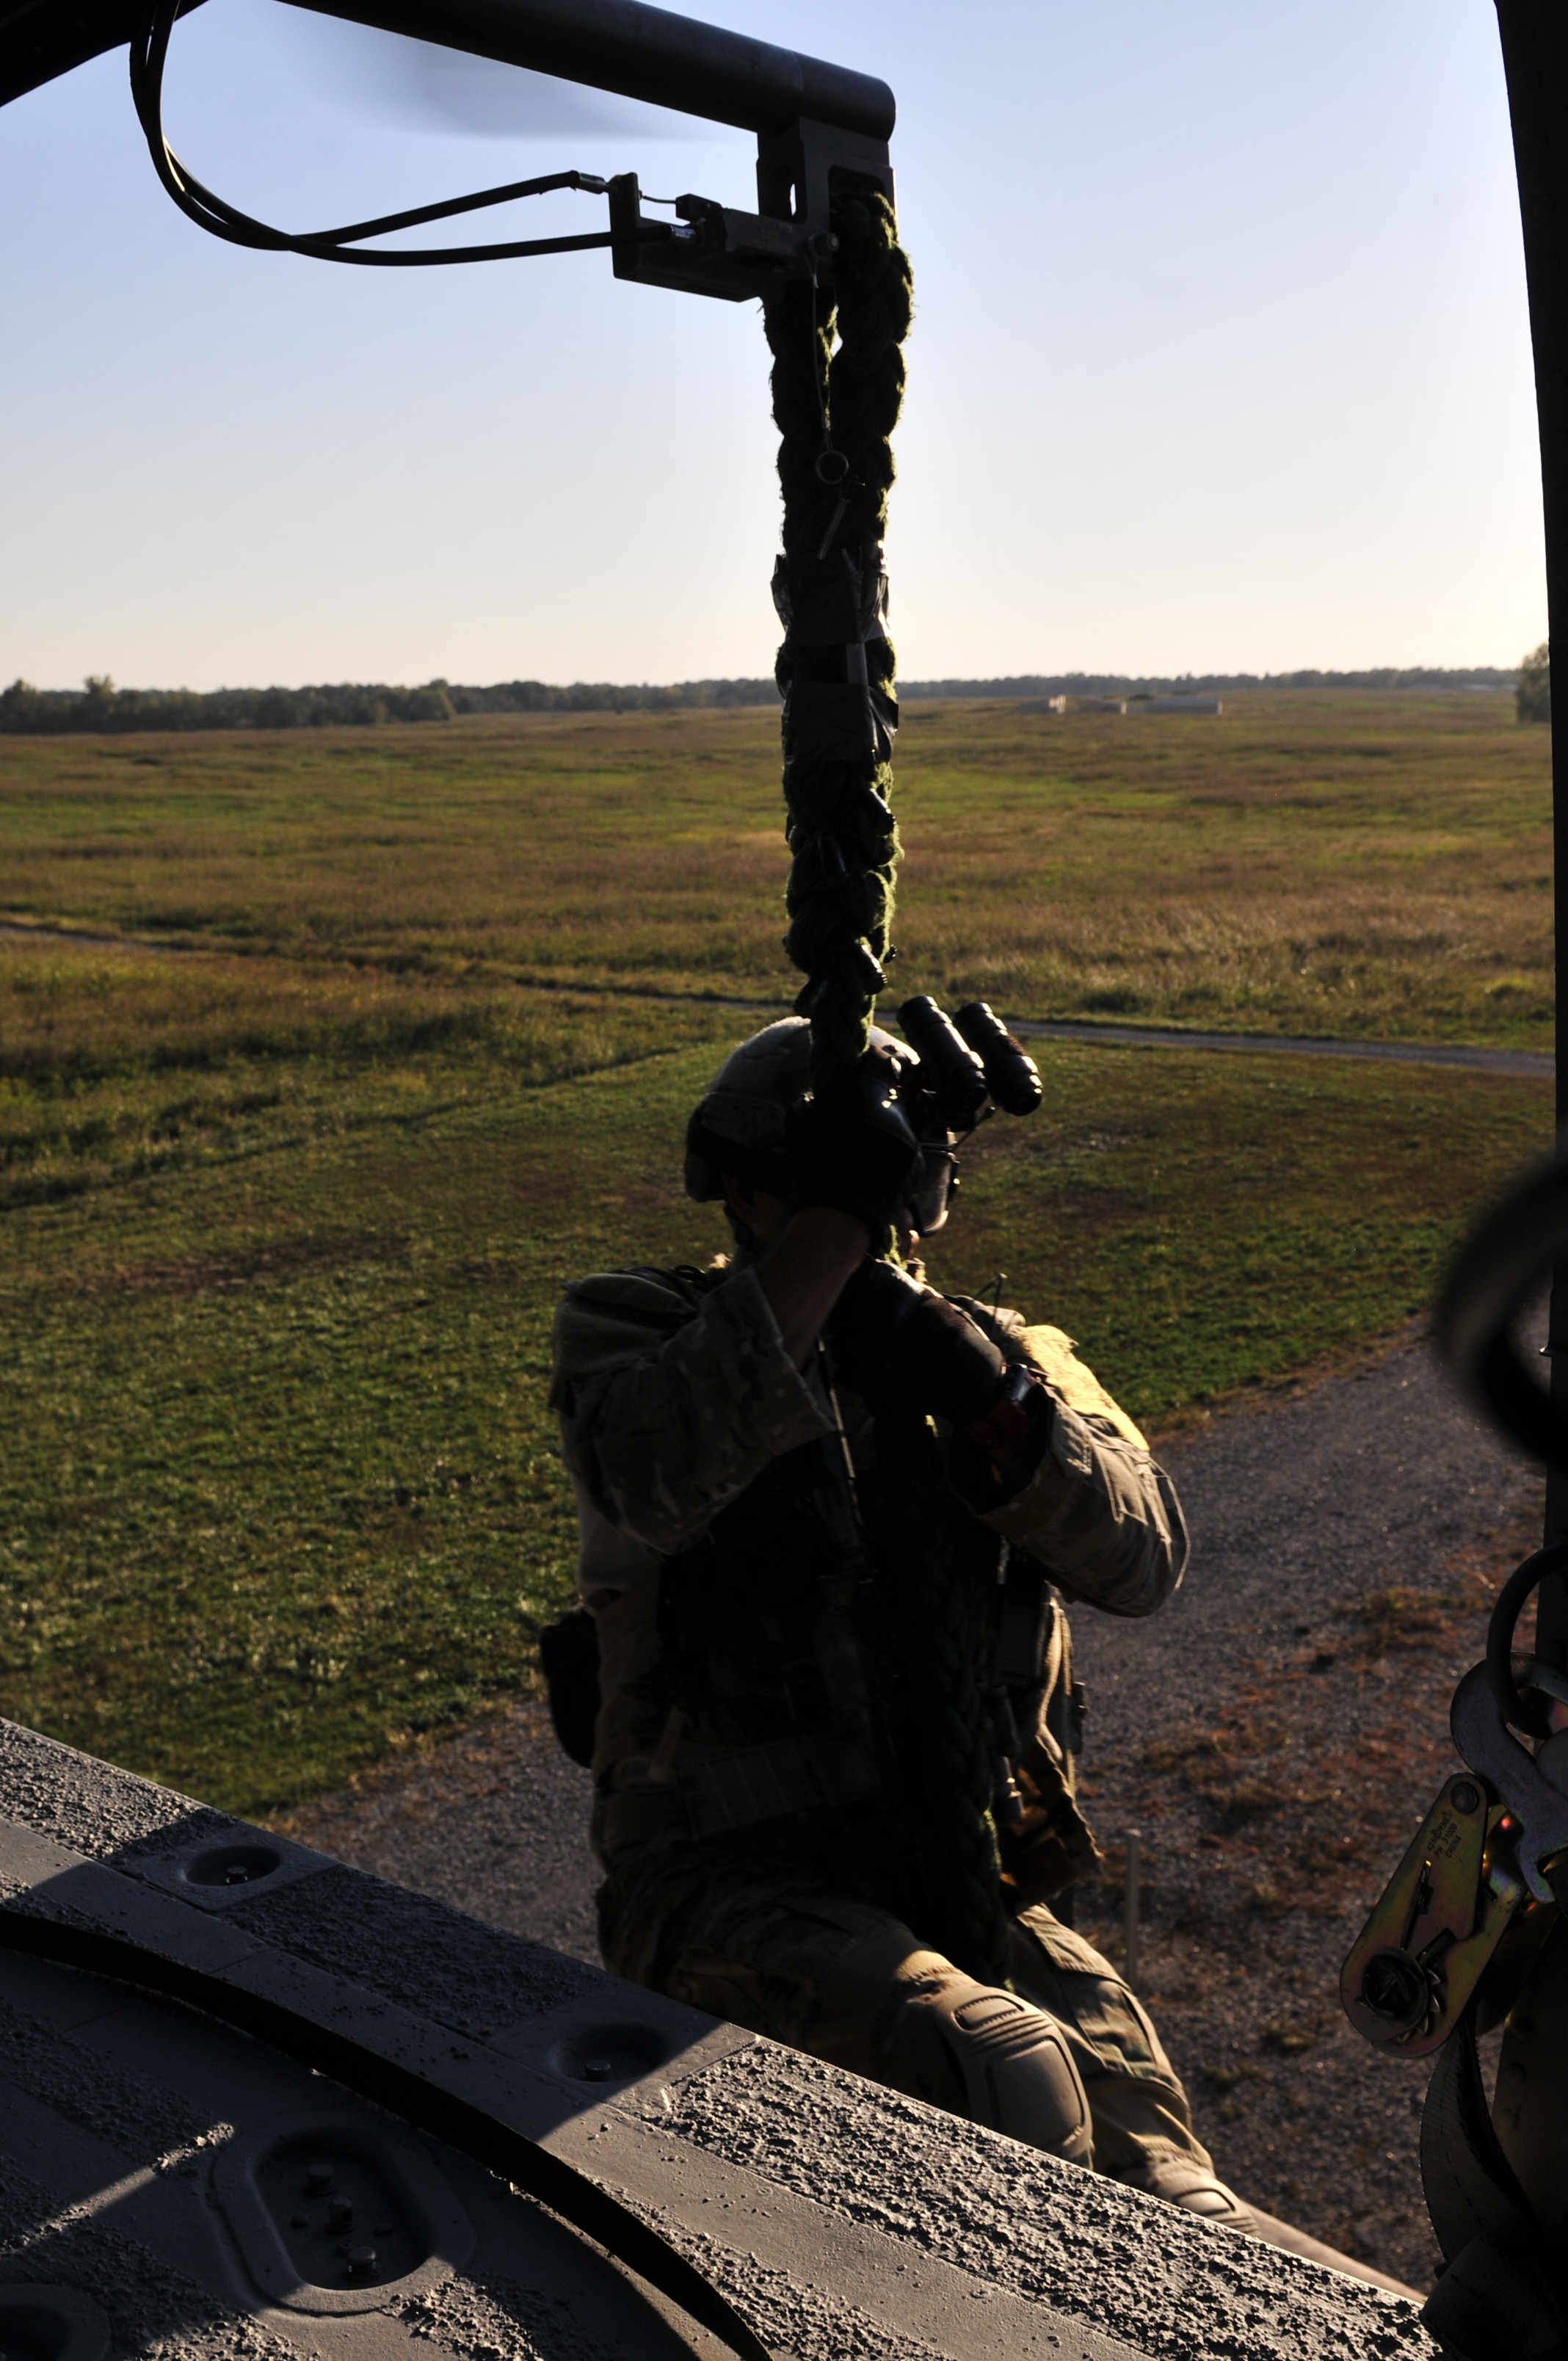 101st Cab Assists Sf In Fast Rope Insertion And Extraction System Training Article The